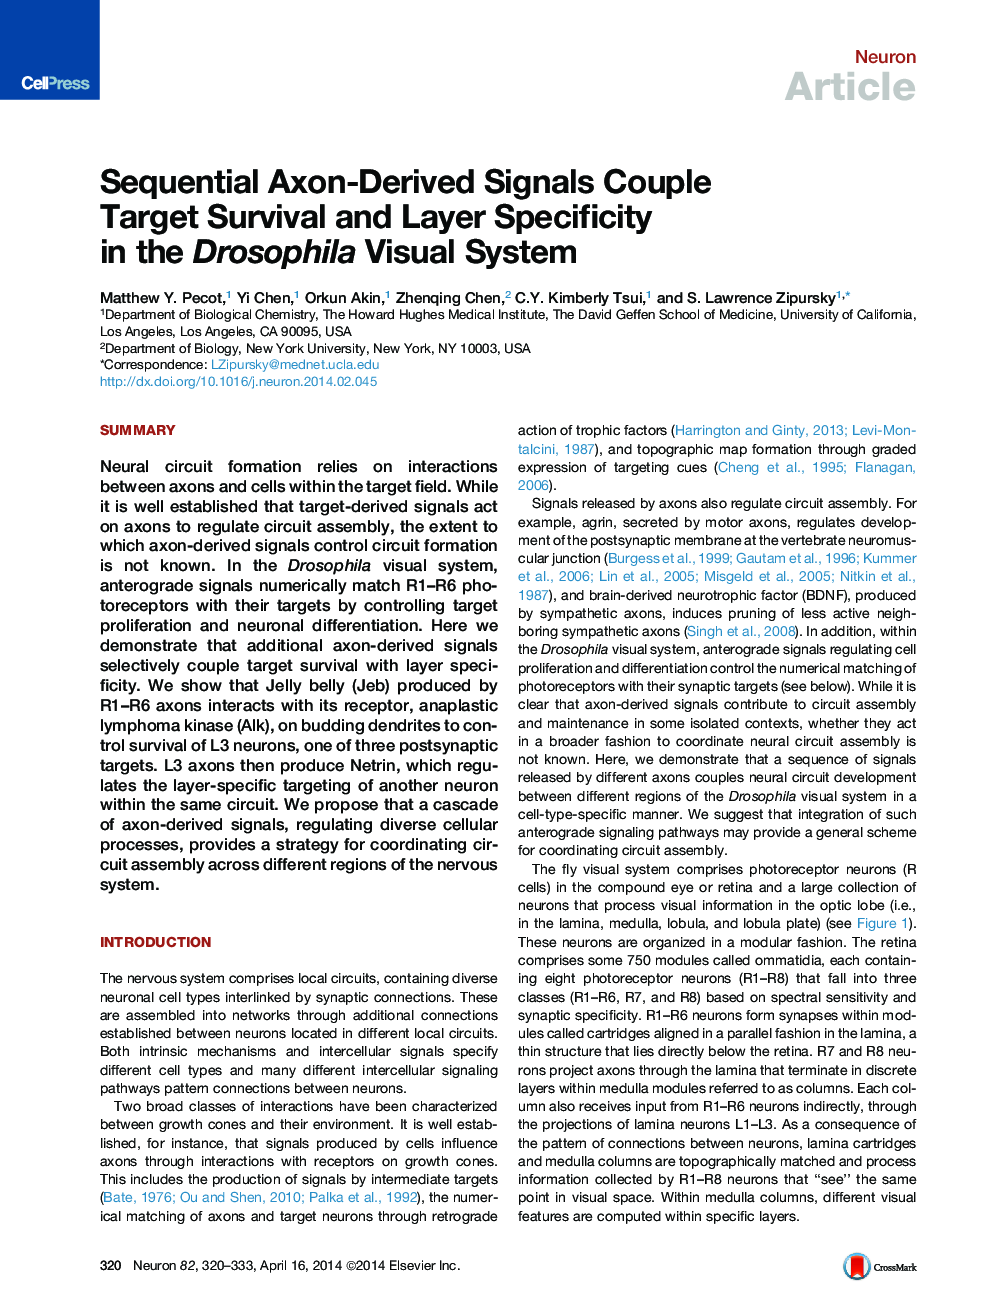 Sequential Axon-Derived Signals Couple Target Survival and Layer Specificity in the Drosophila Visual System